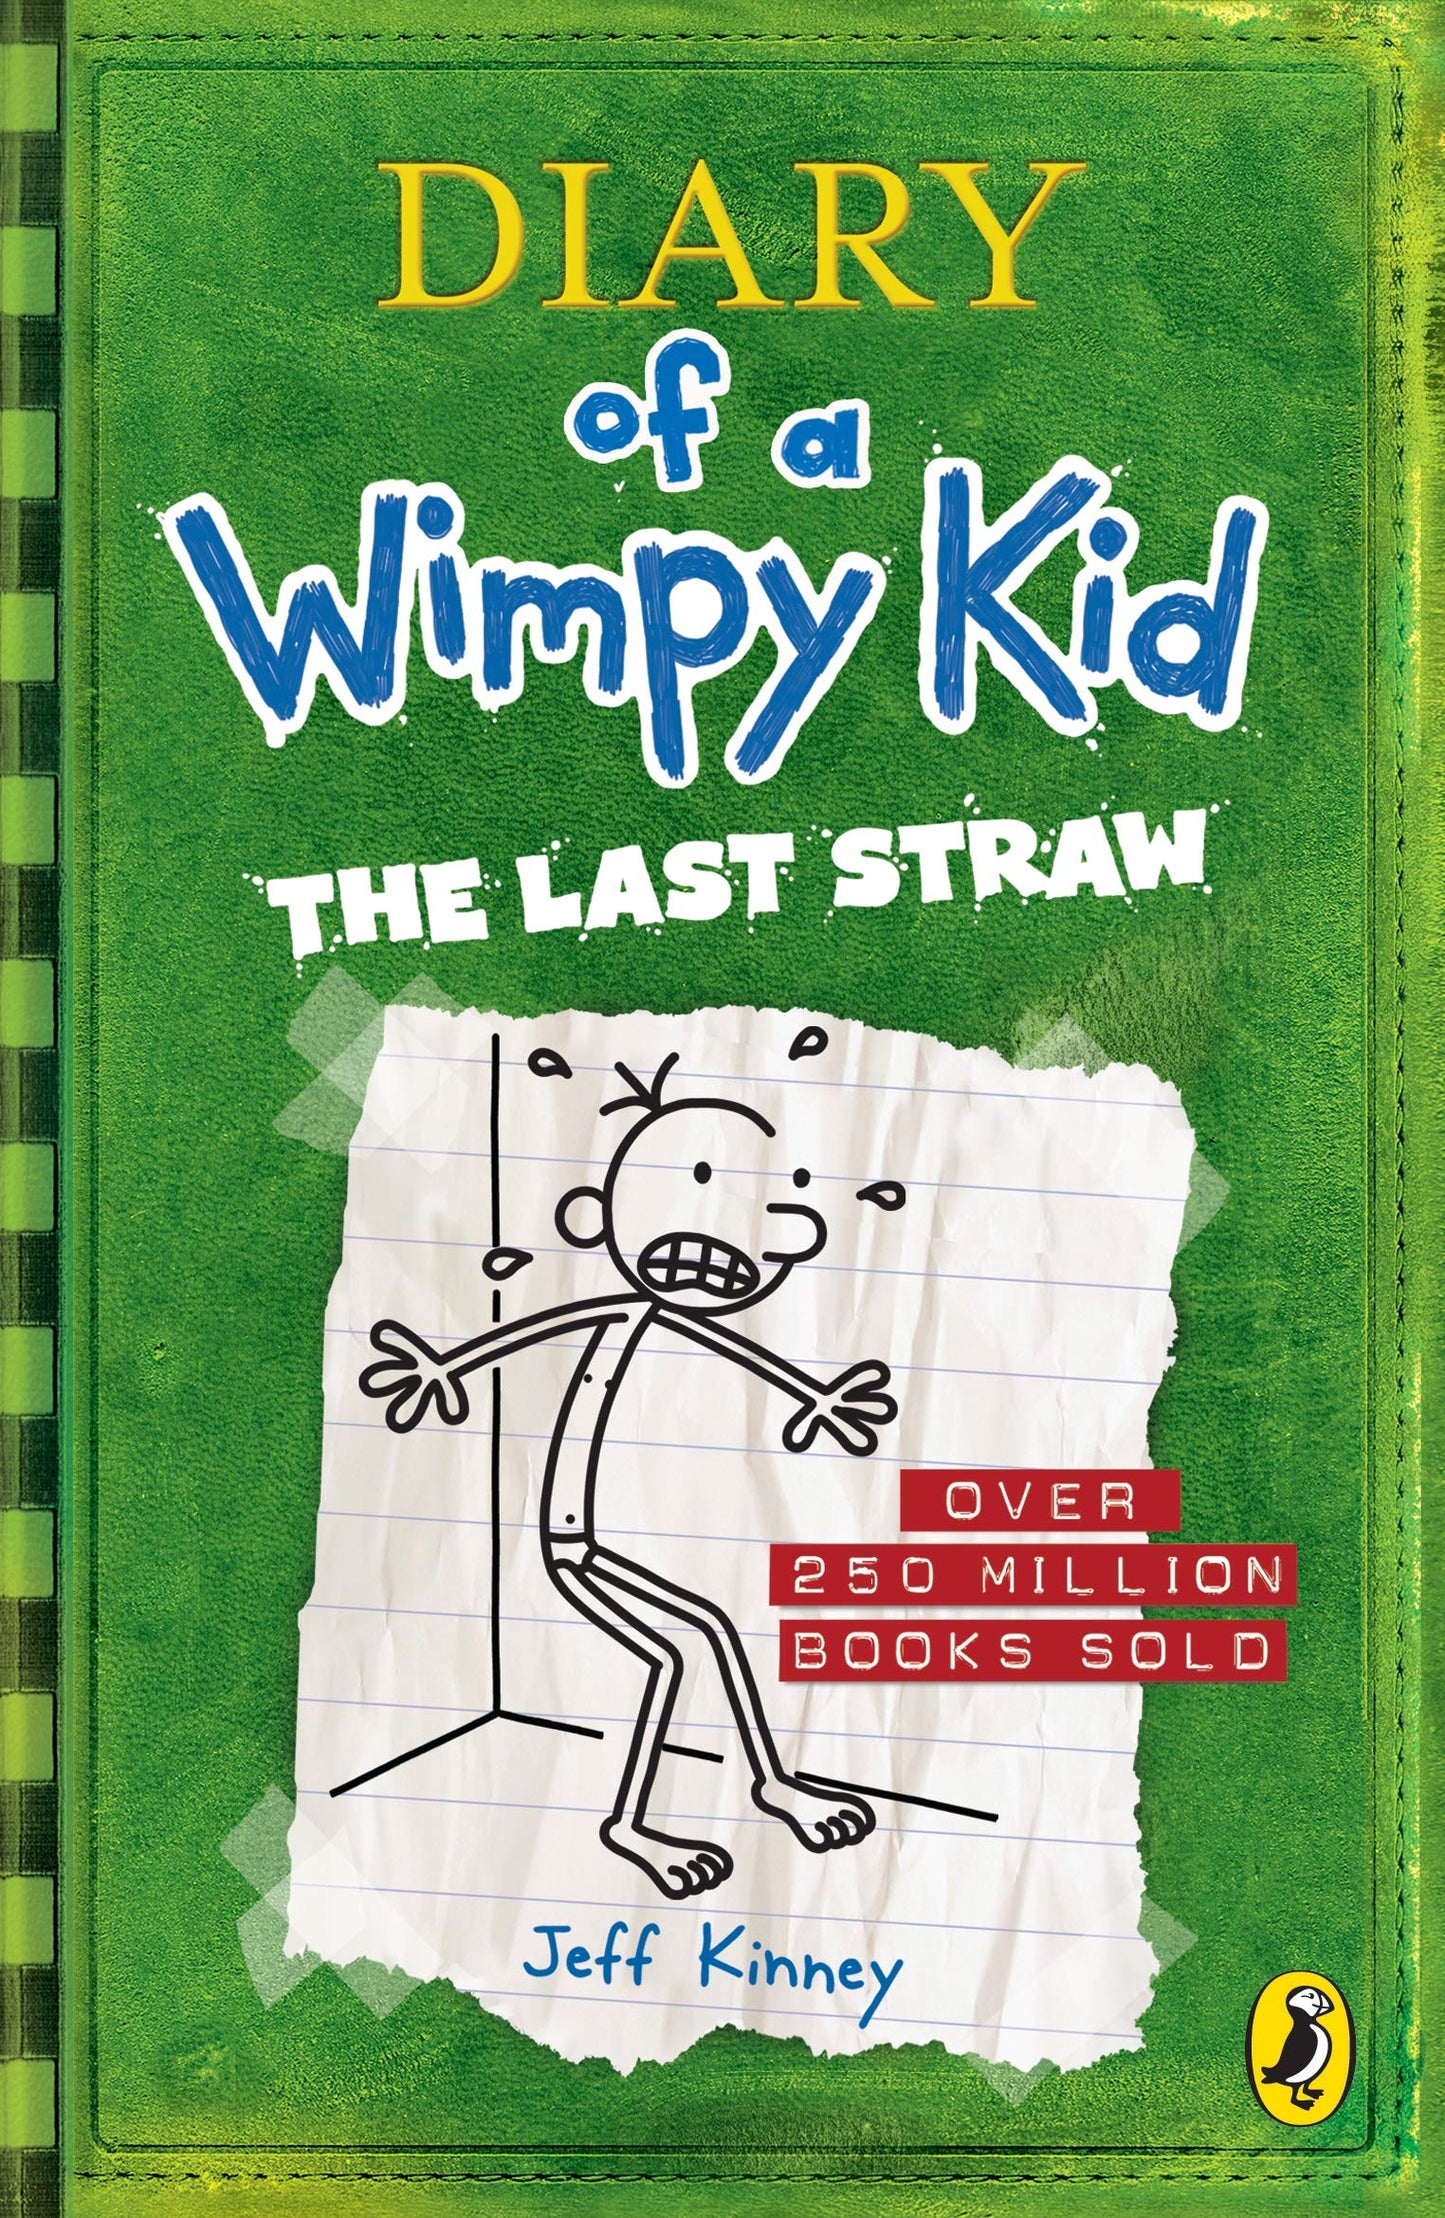 Diary of Wimpy Kid 3. The Last Straw (Diary of a Wimpy Kid)